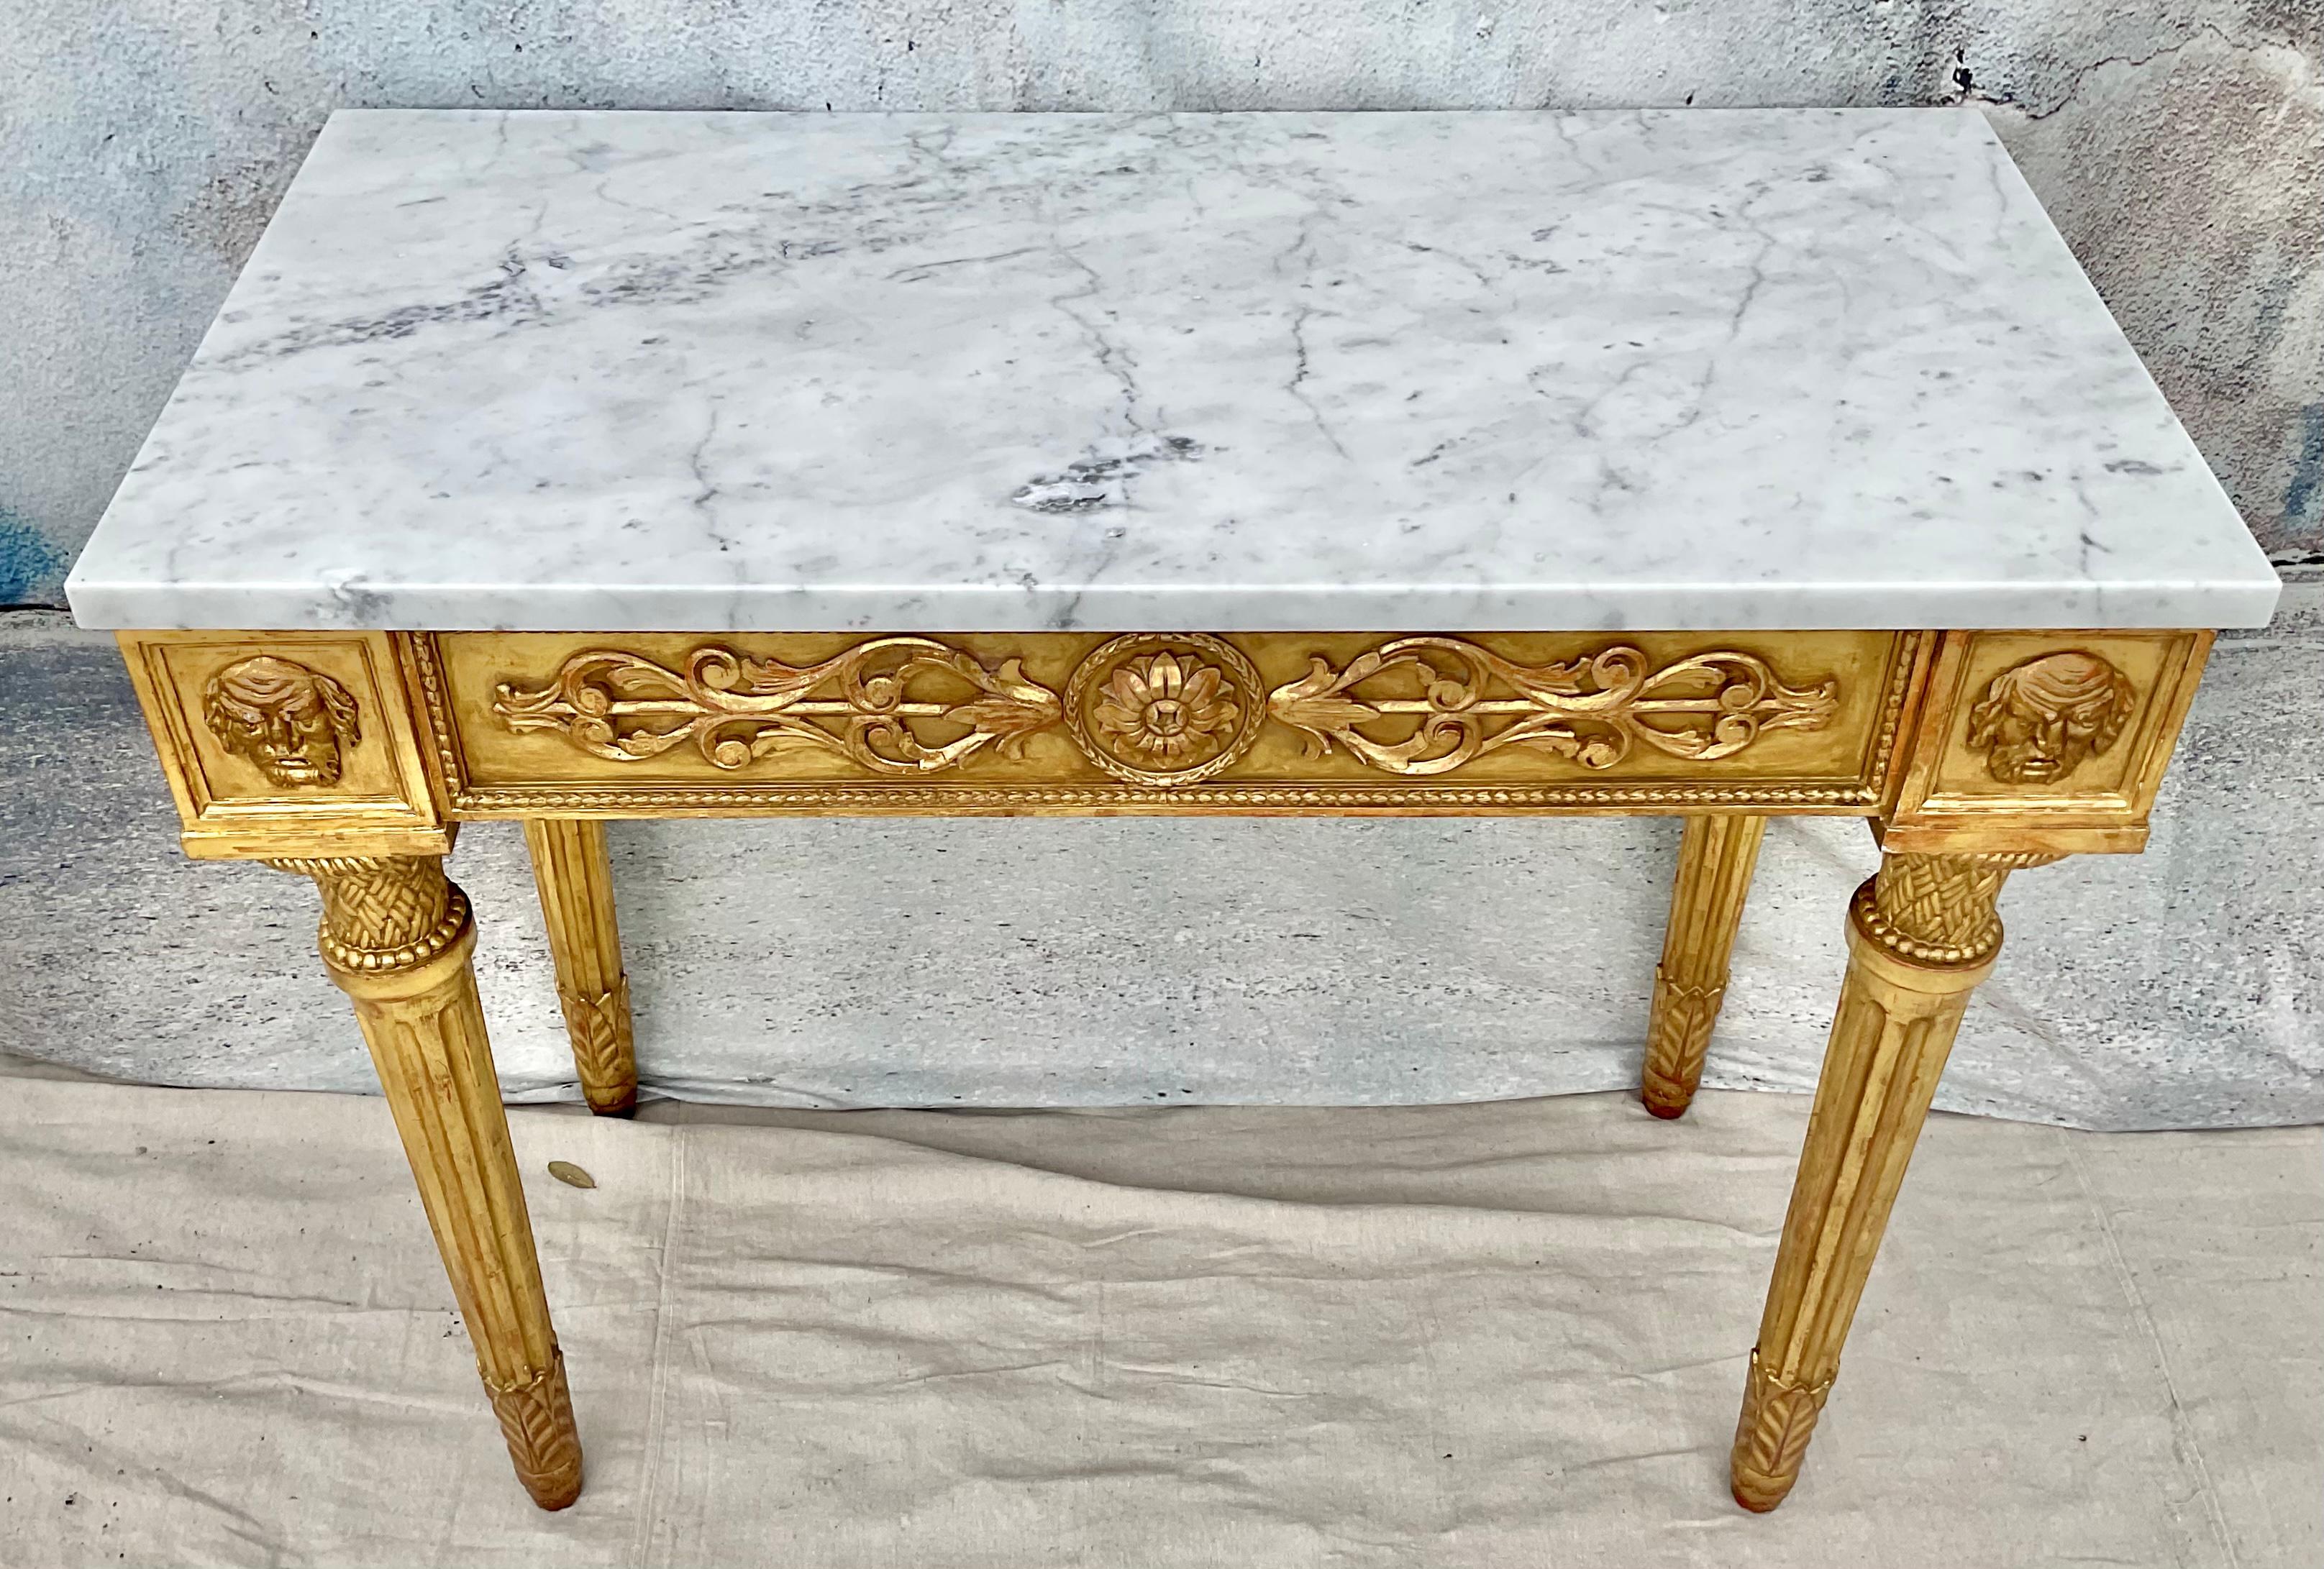 Pair Of 19th Century Italian Neoclassical Giltwood Console table With Marble Top For Sale 7